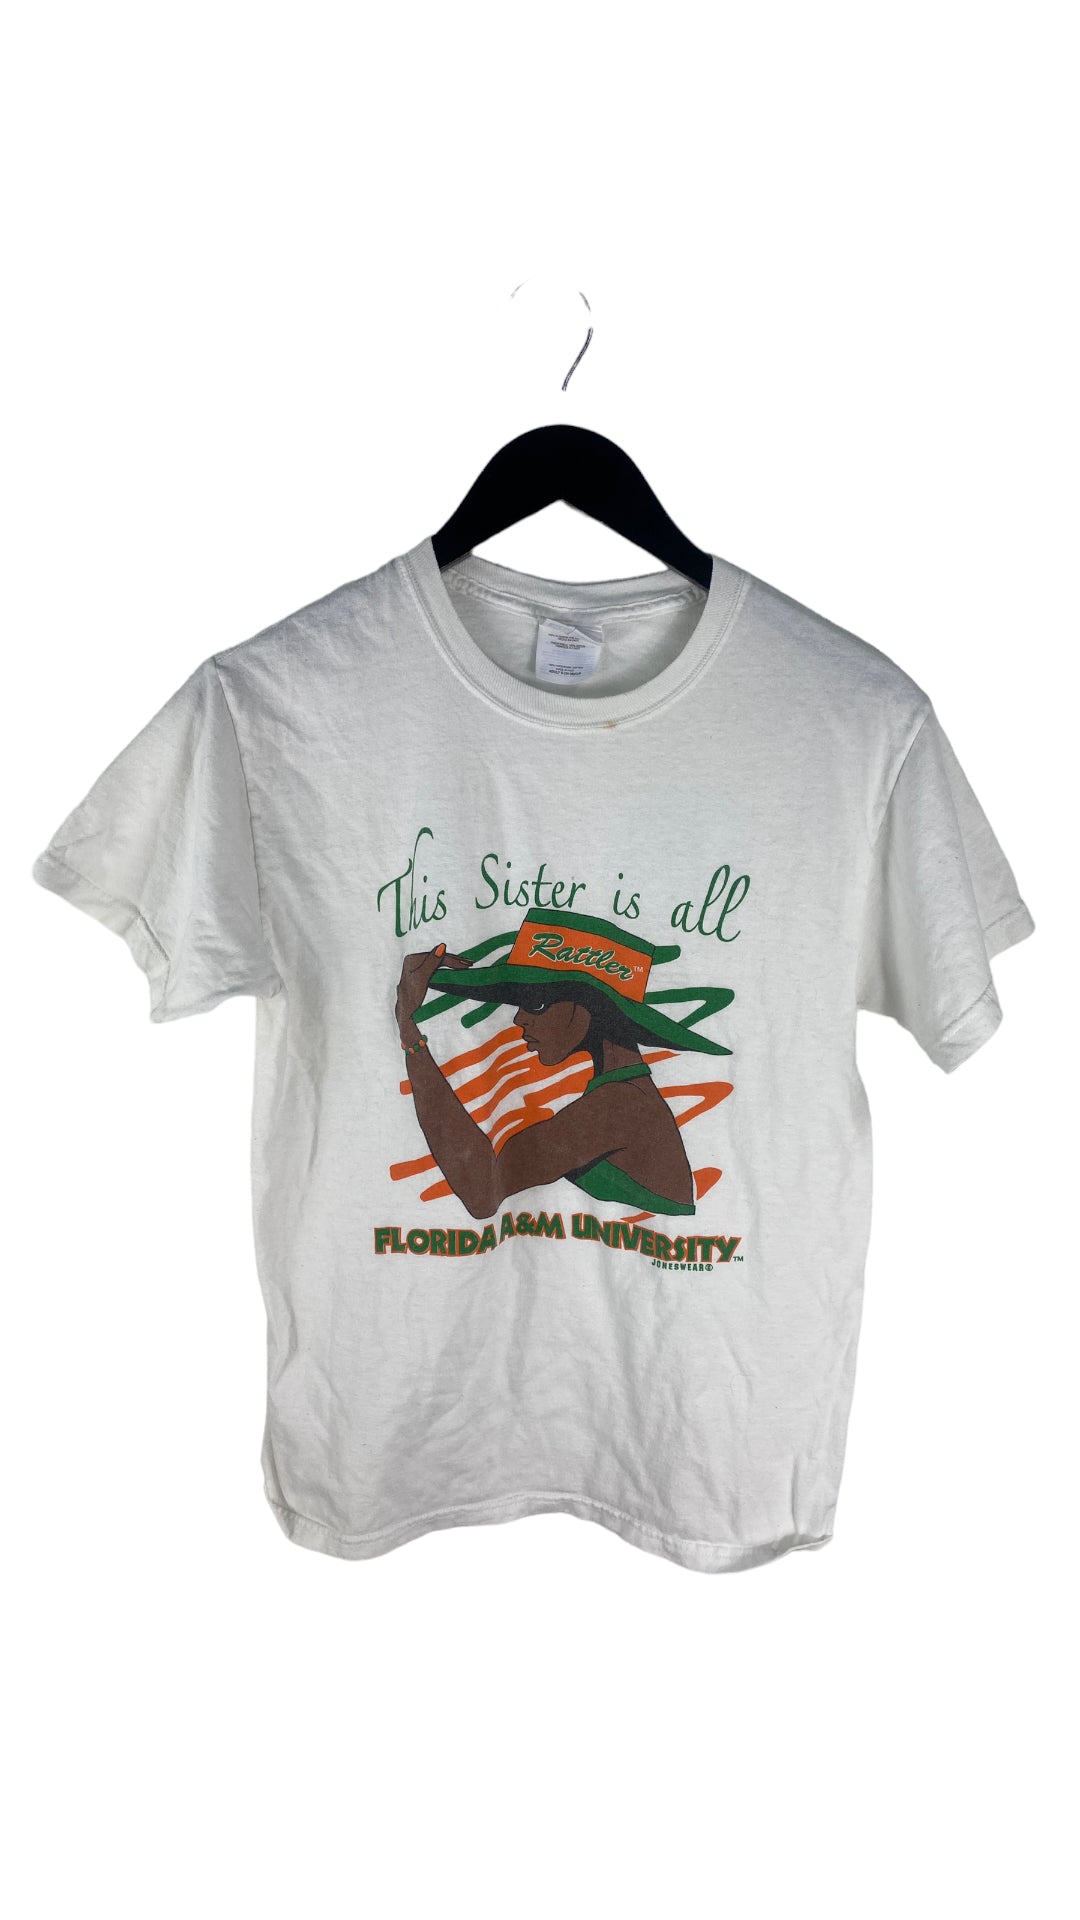 Vtg Florida A&M "This Sister is All" Tee Sz S